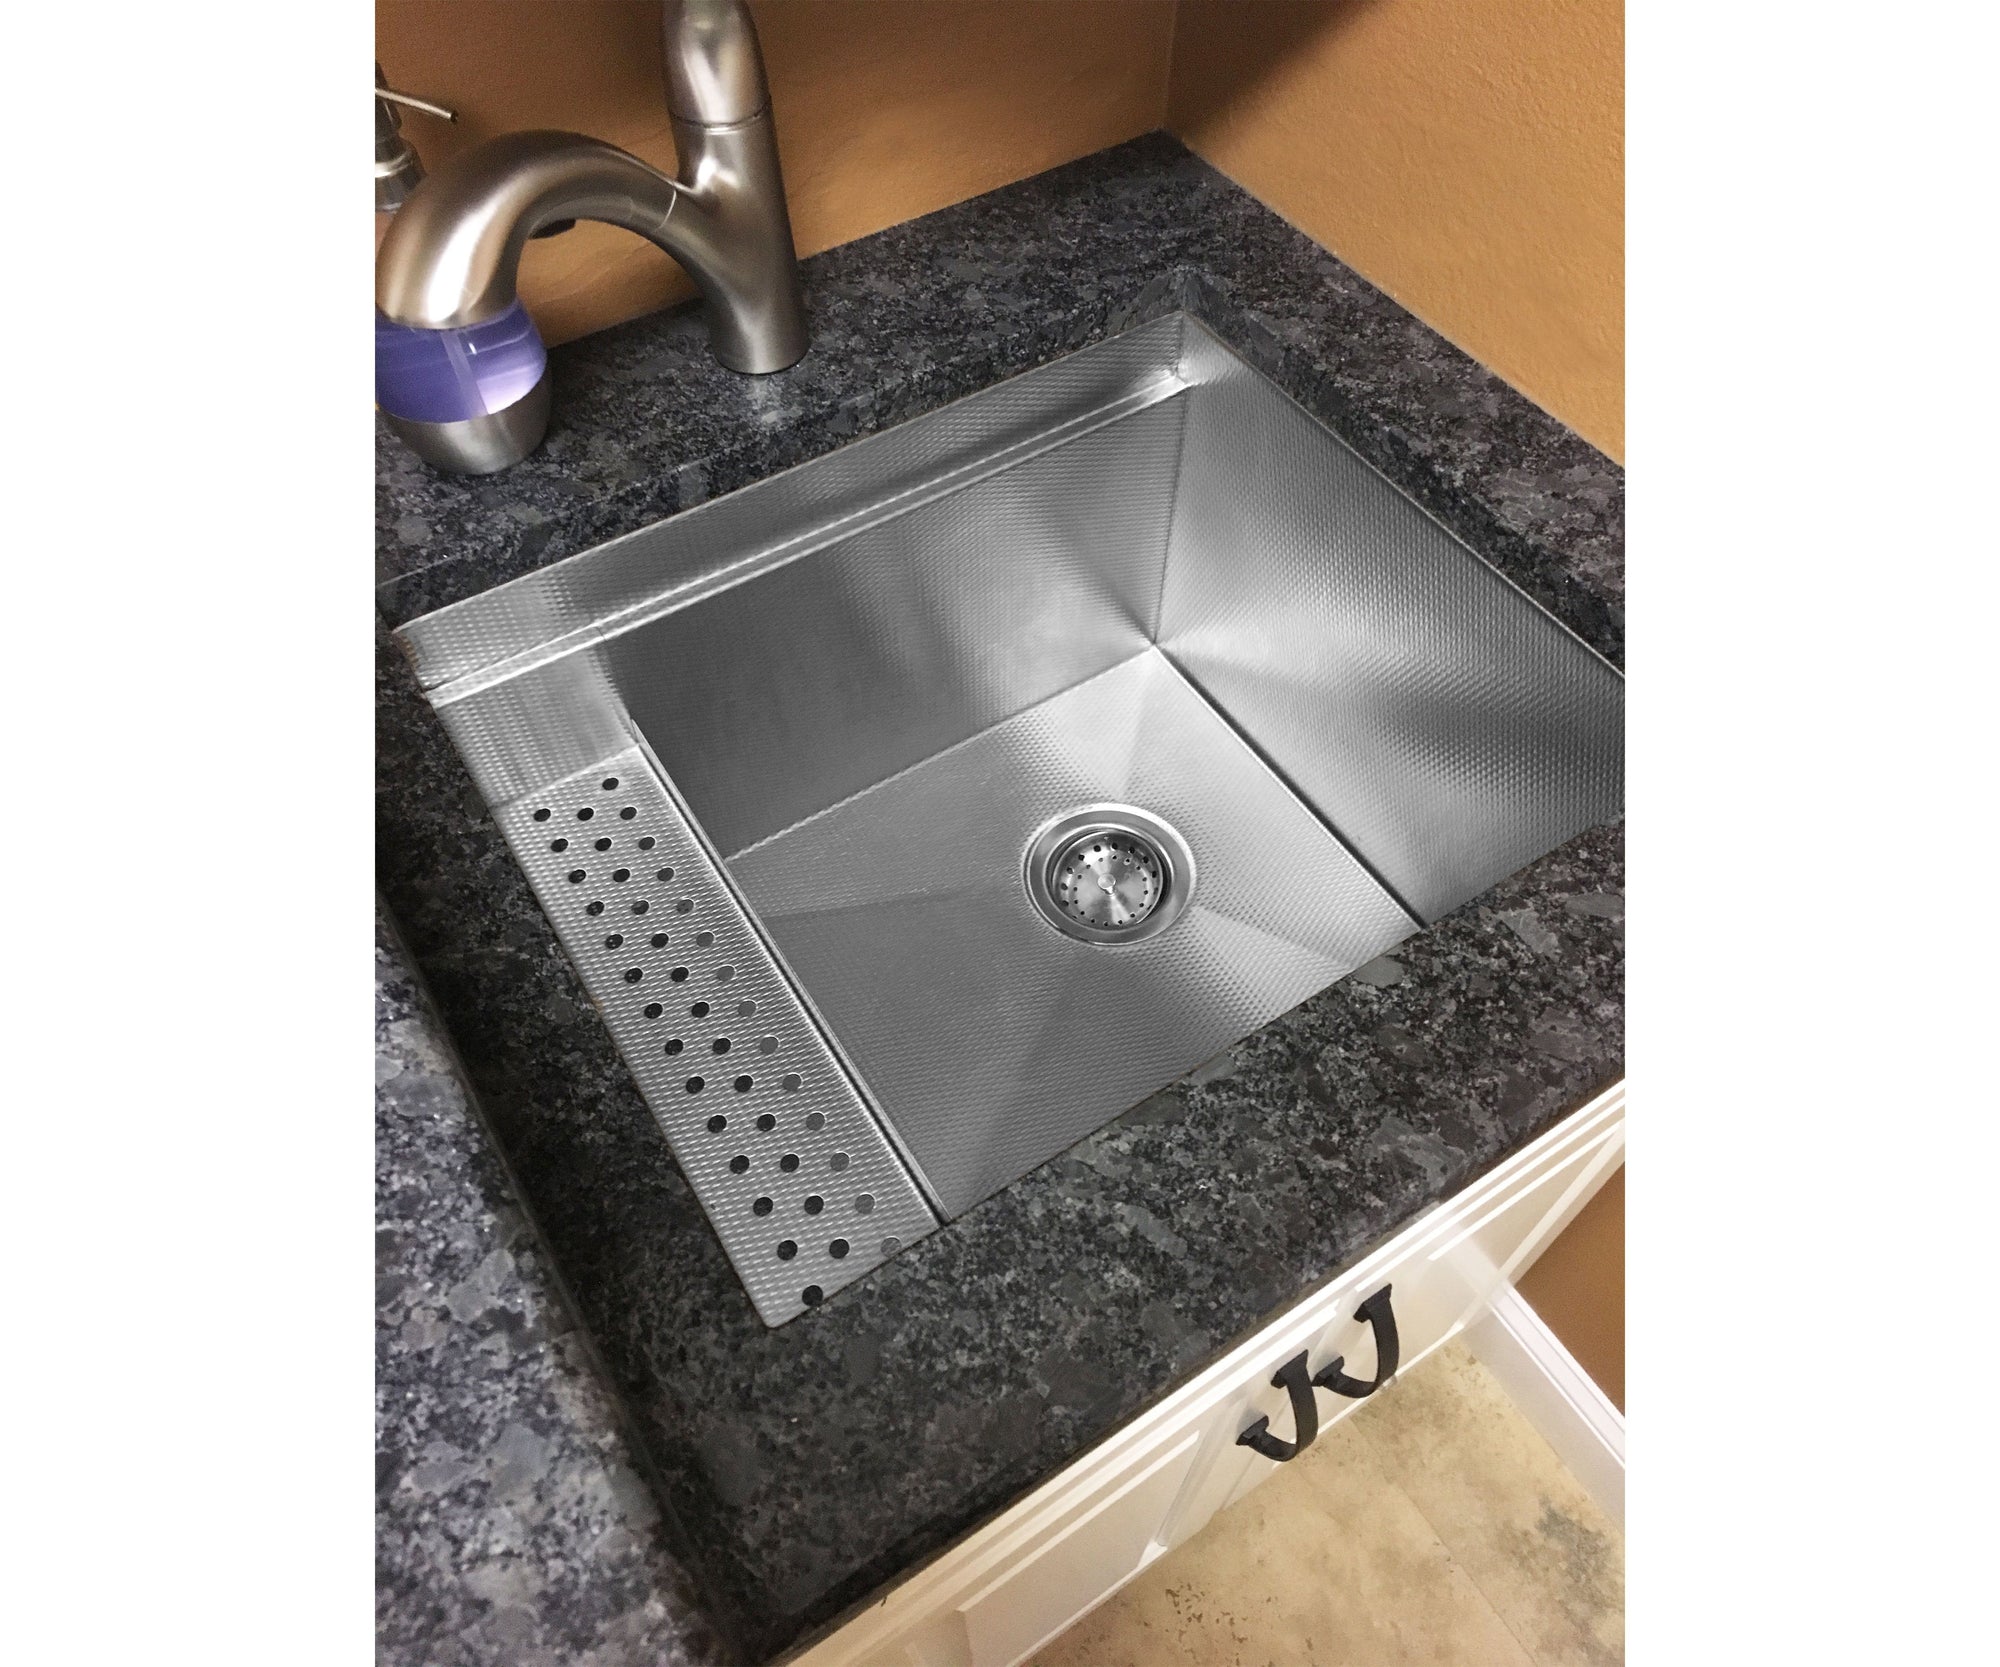 Textured stainless steel utility sink